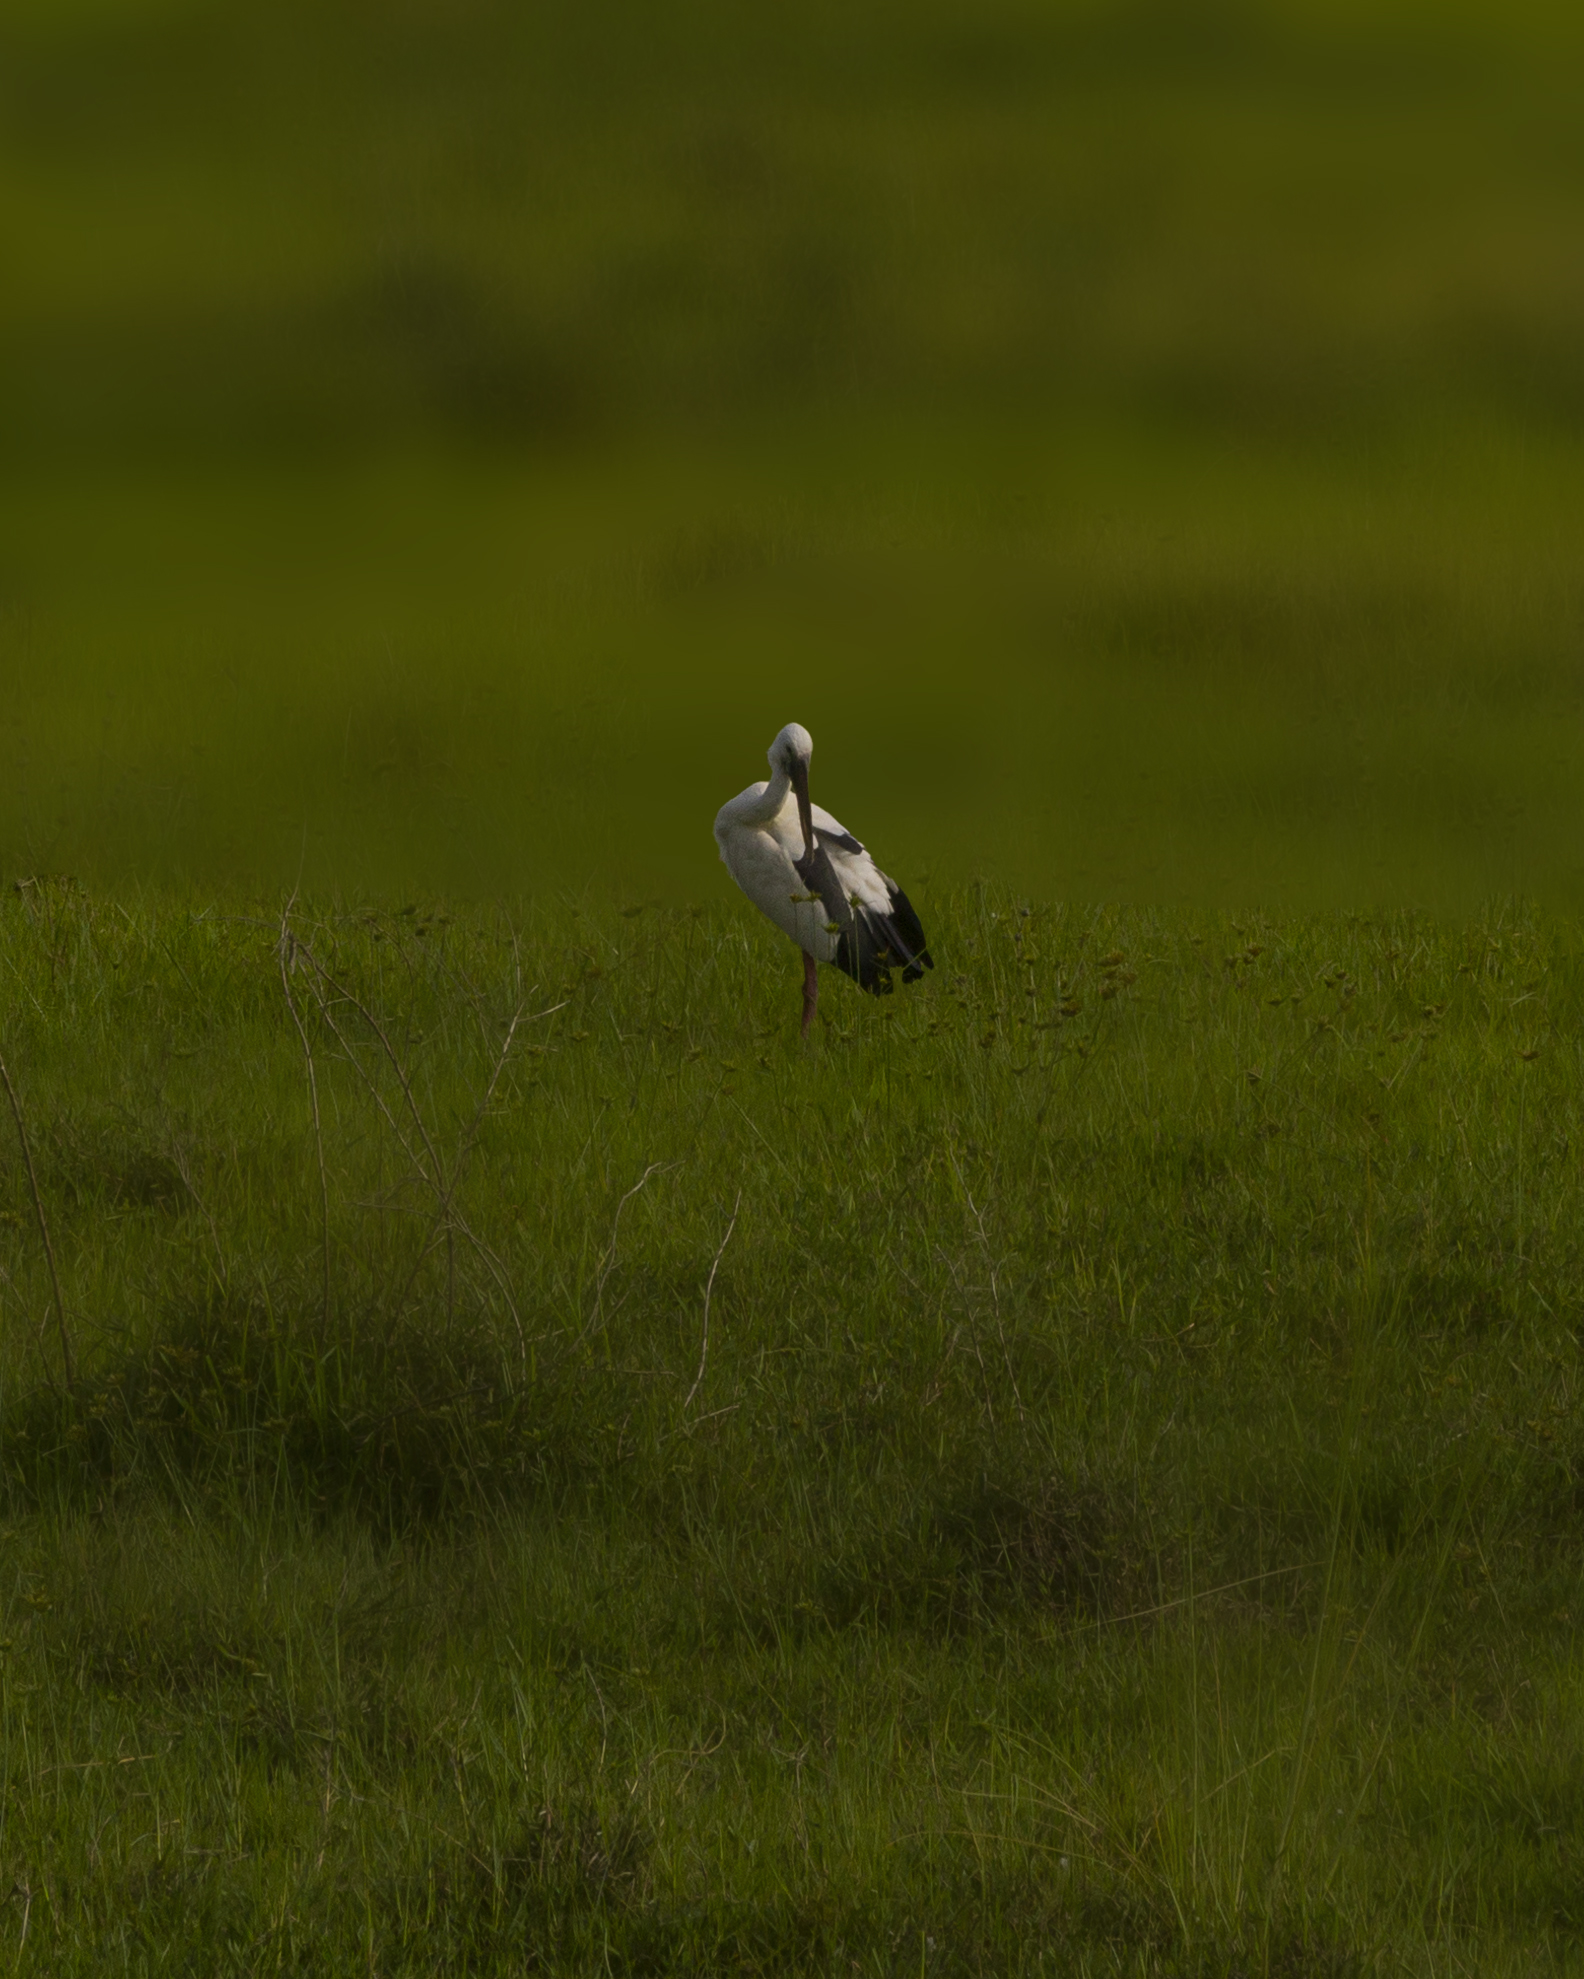 A heron on the grass